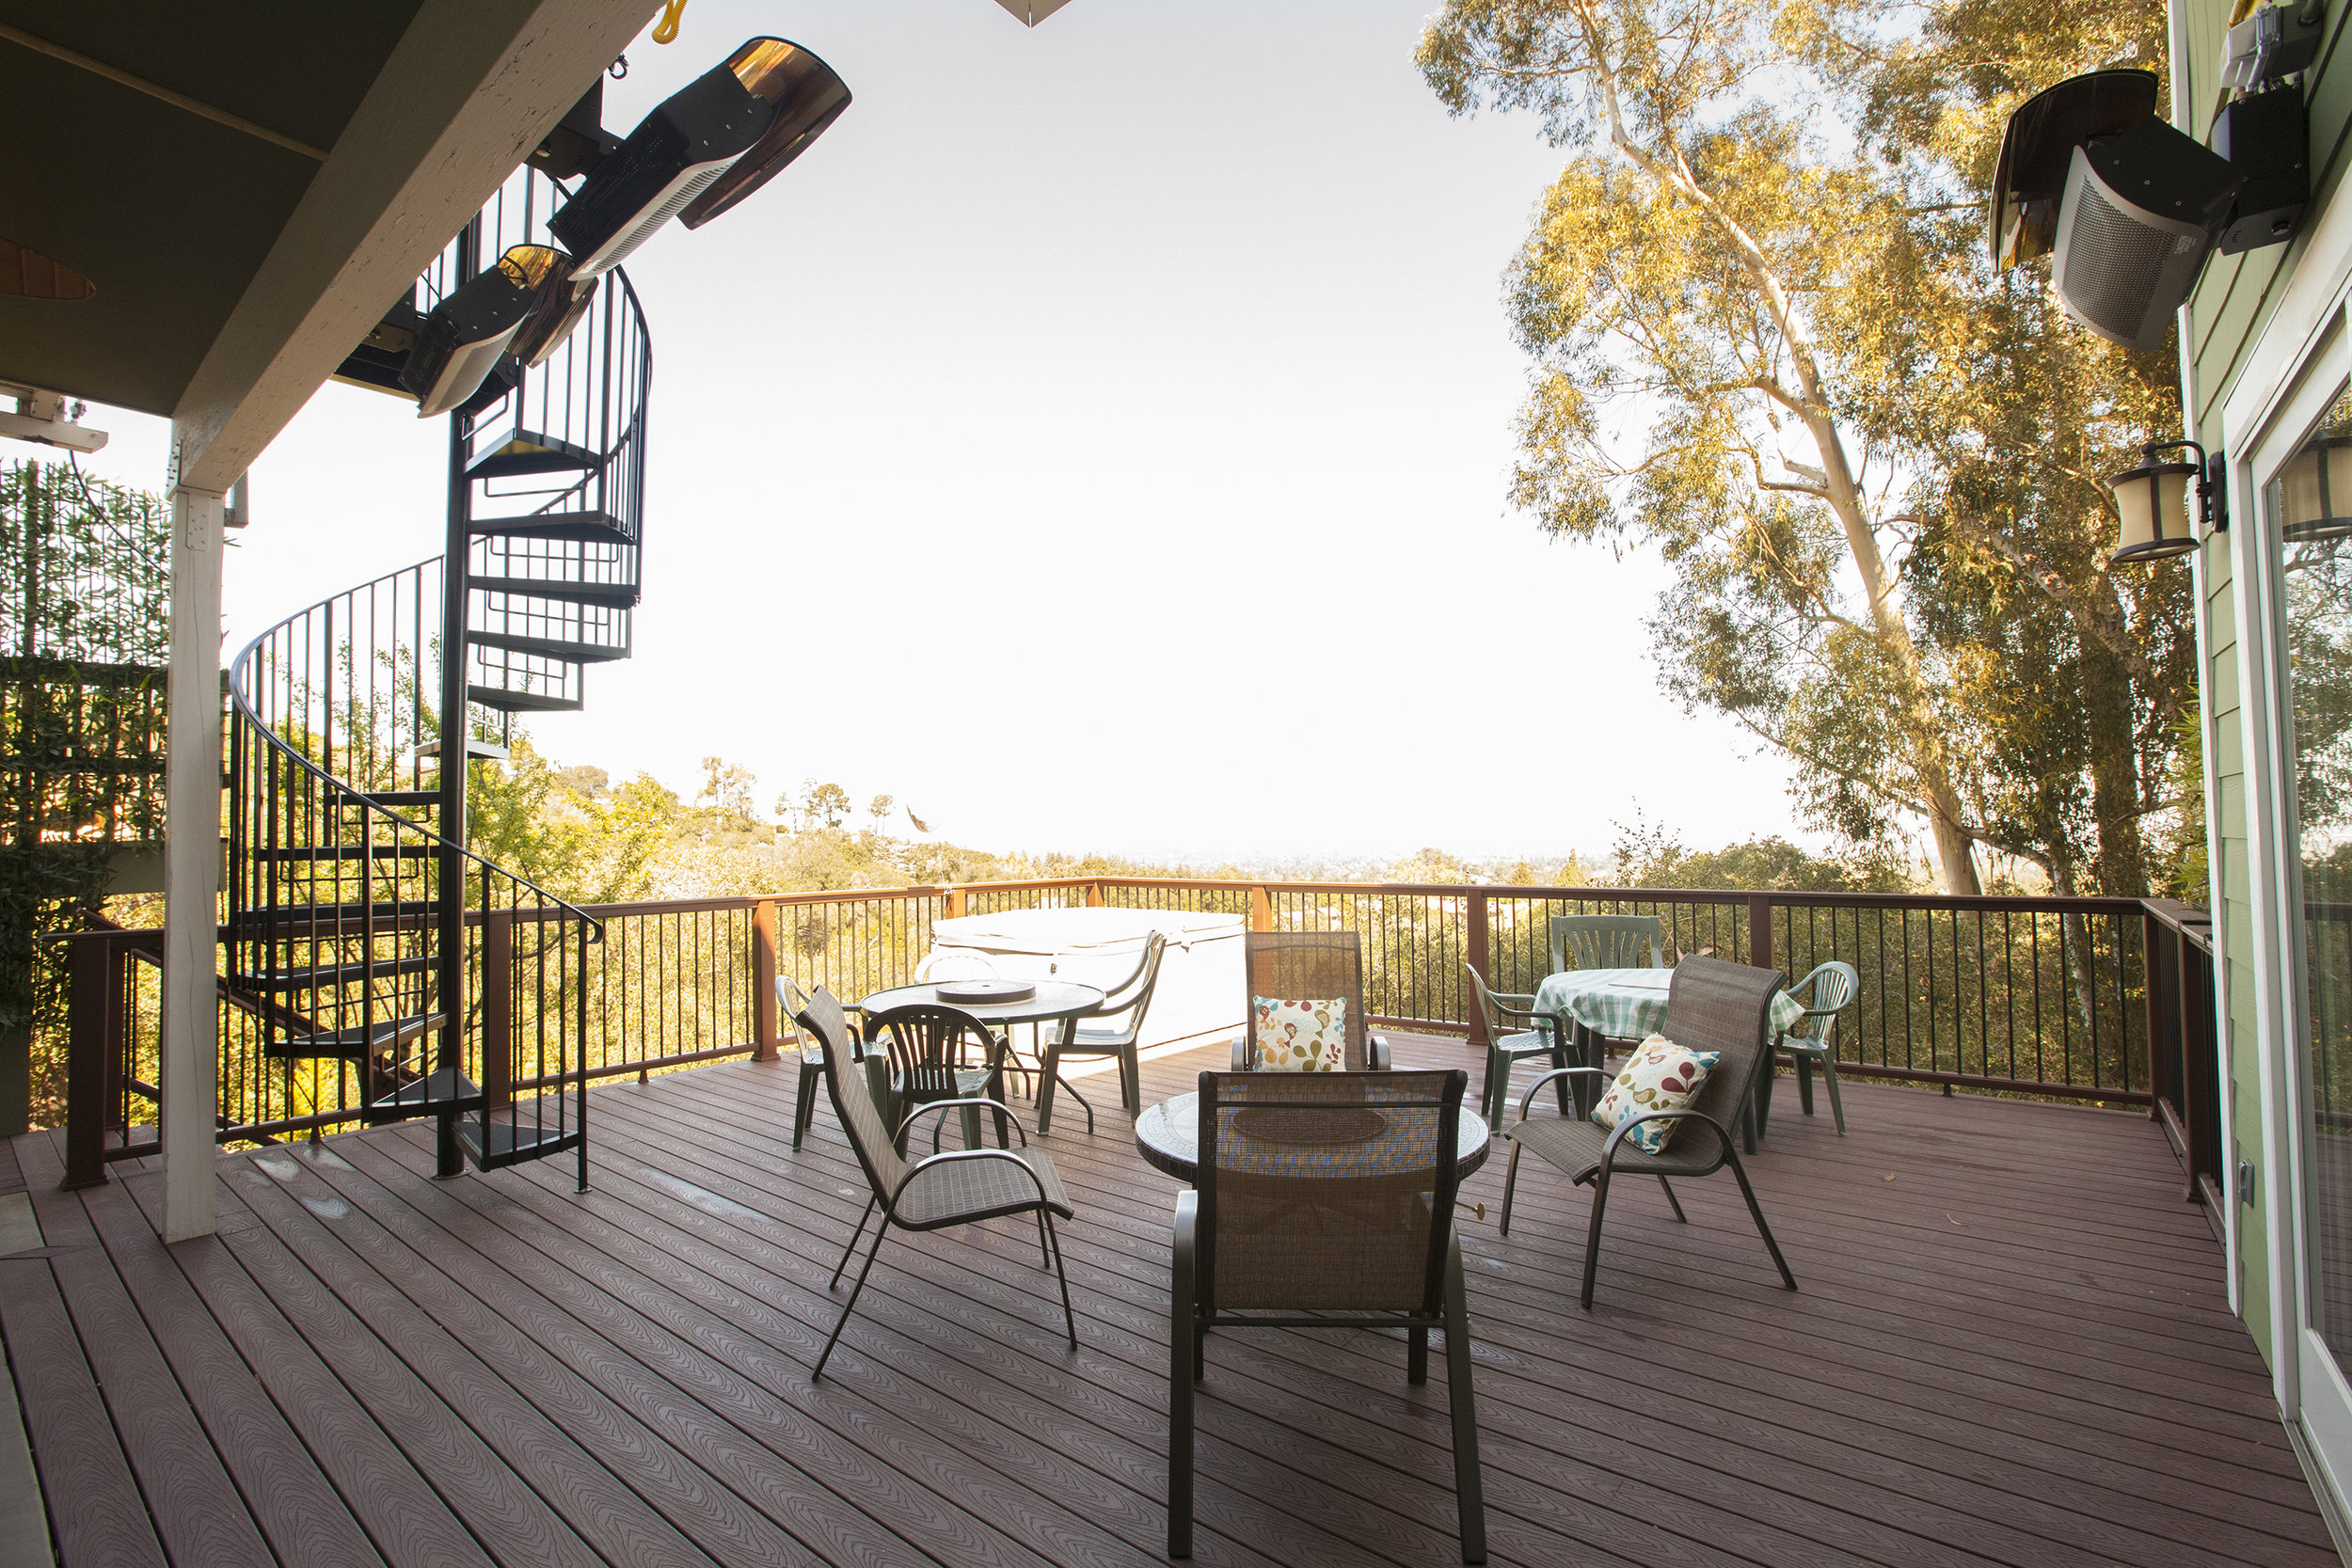  The new deck is twice the size for larger entertaining, taking advantage of the large property. 